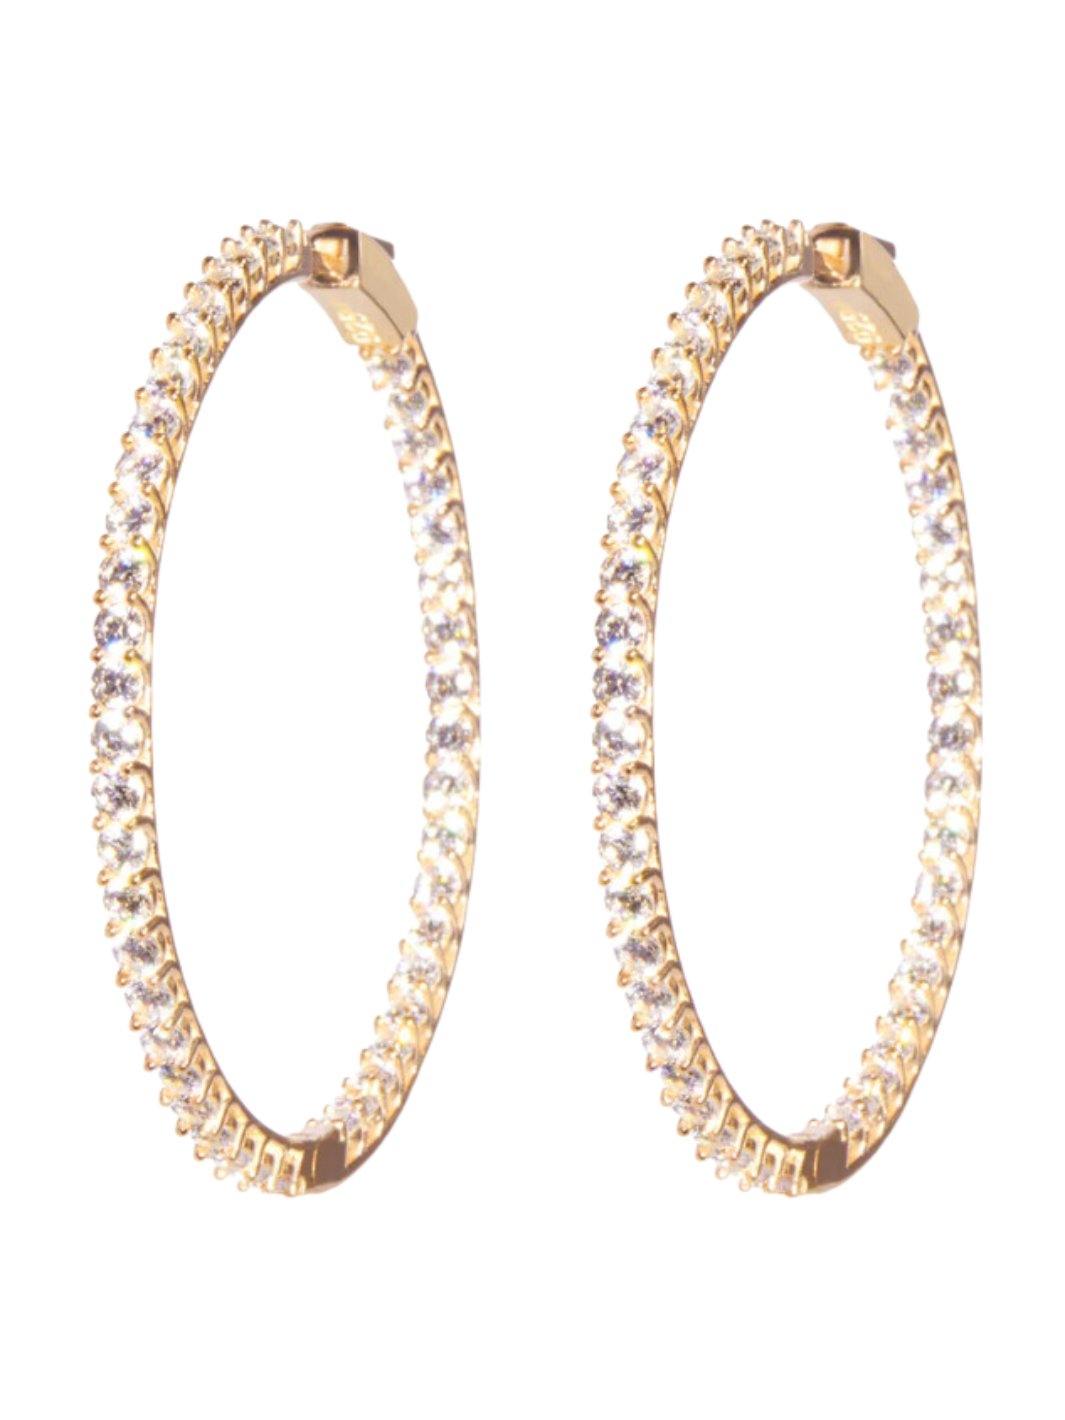 KAY LEE HOOPS IN GOLD - Romi Boutique